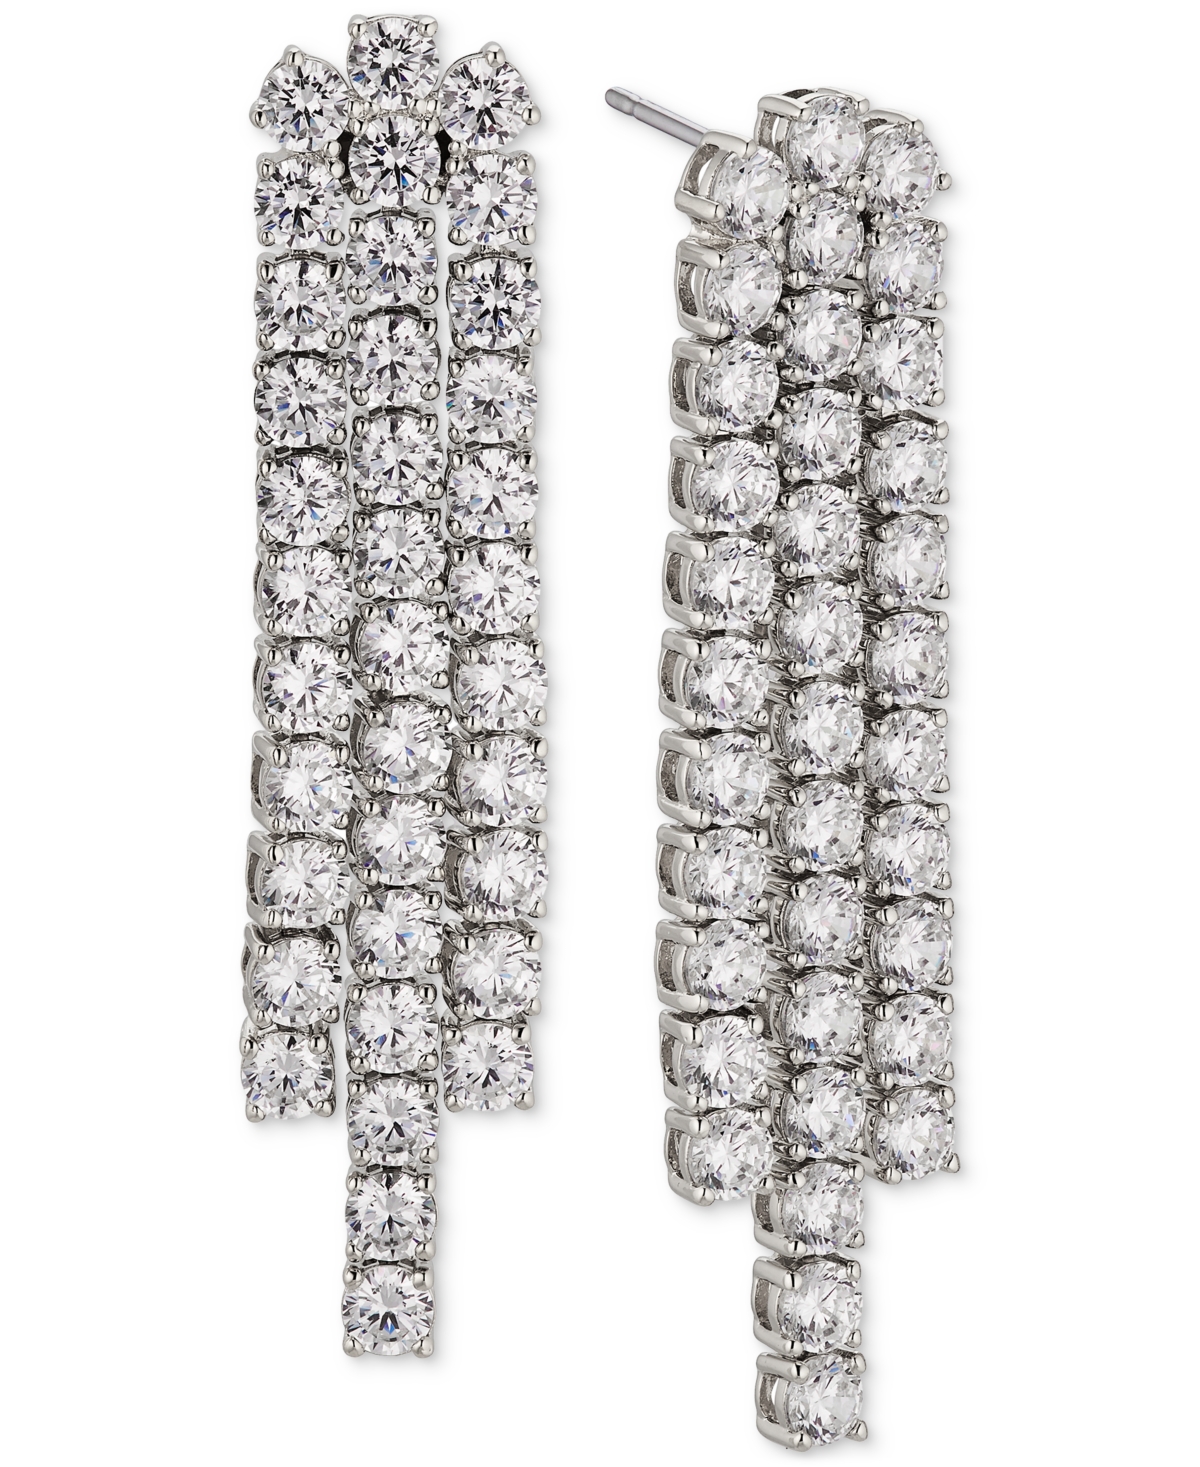 Silver-Tone Cubic Zirconia Chandelier Earrings, Created for Macy's - Rhodium